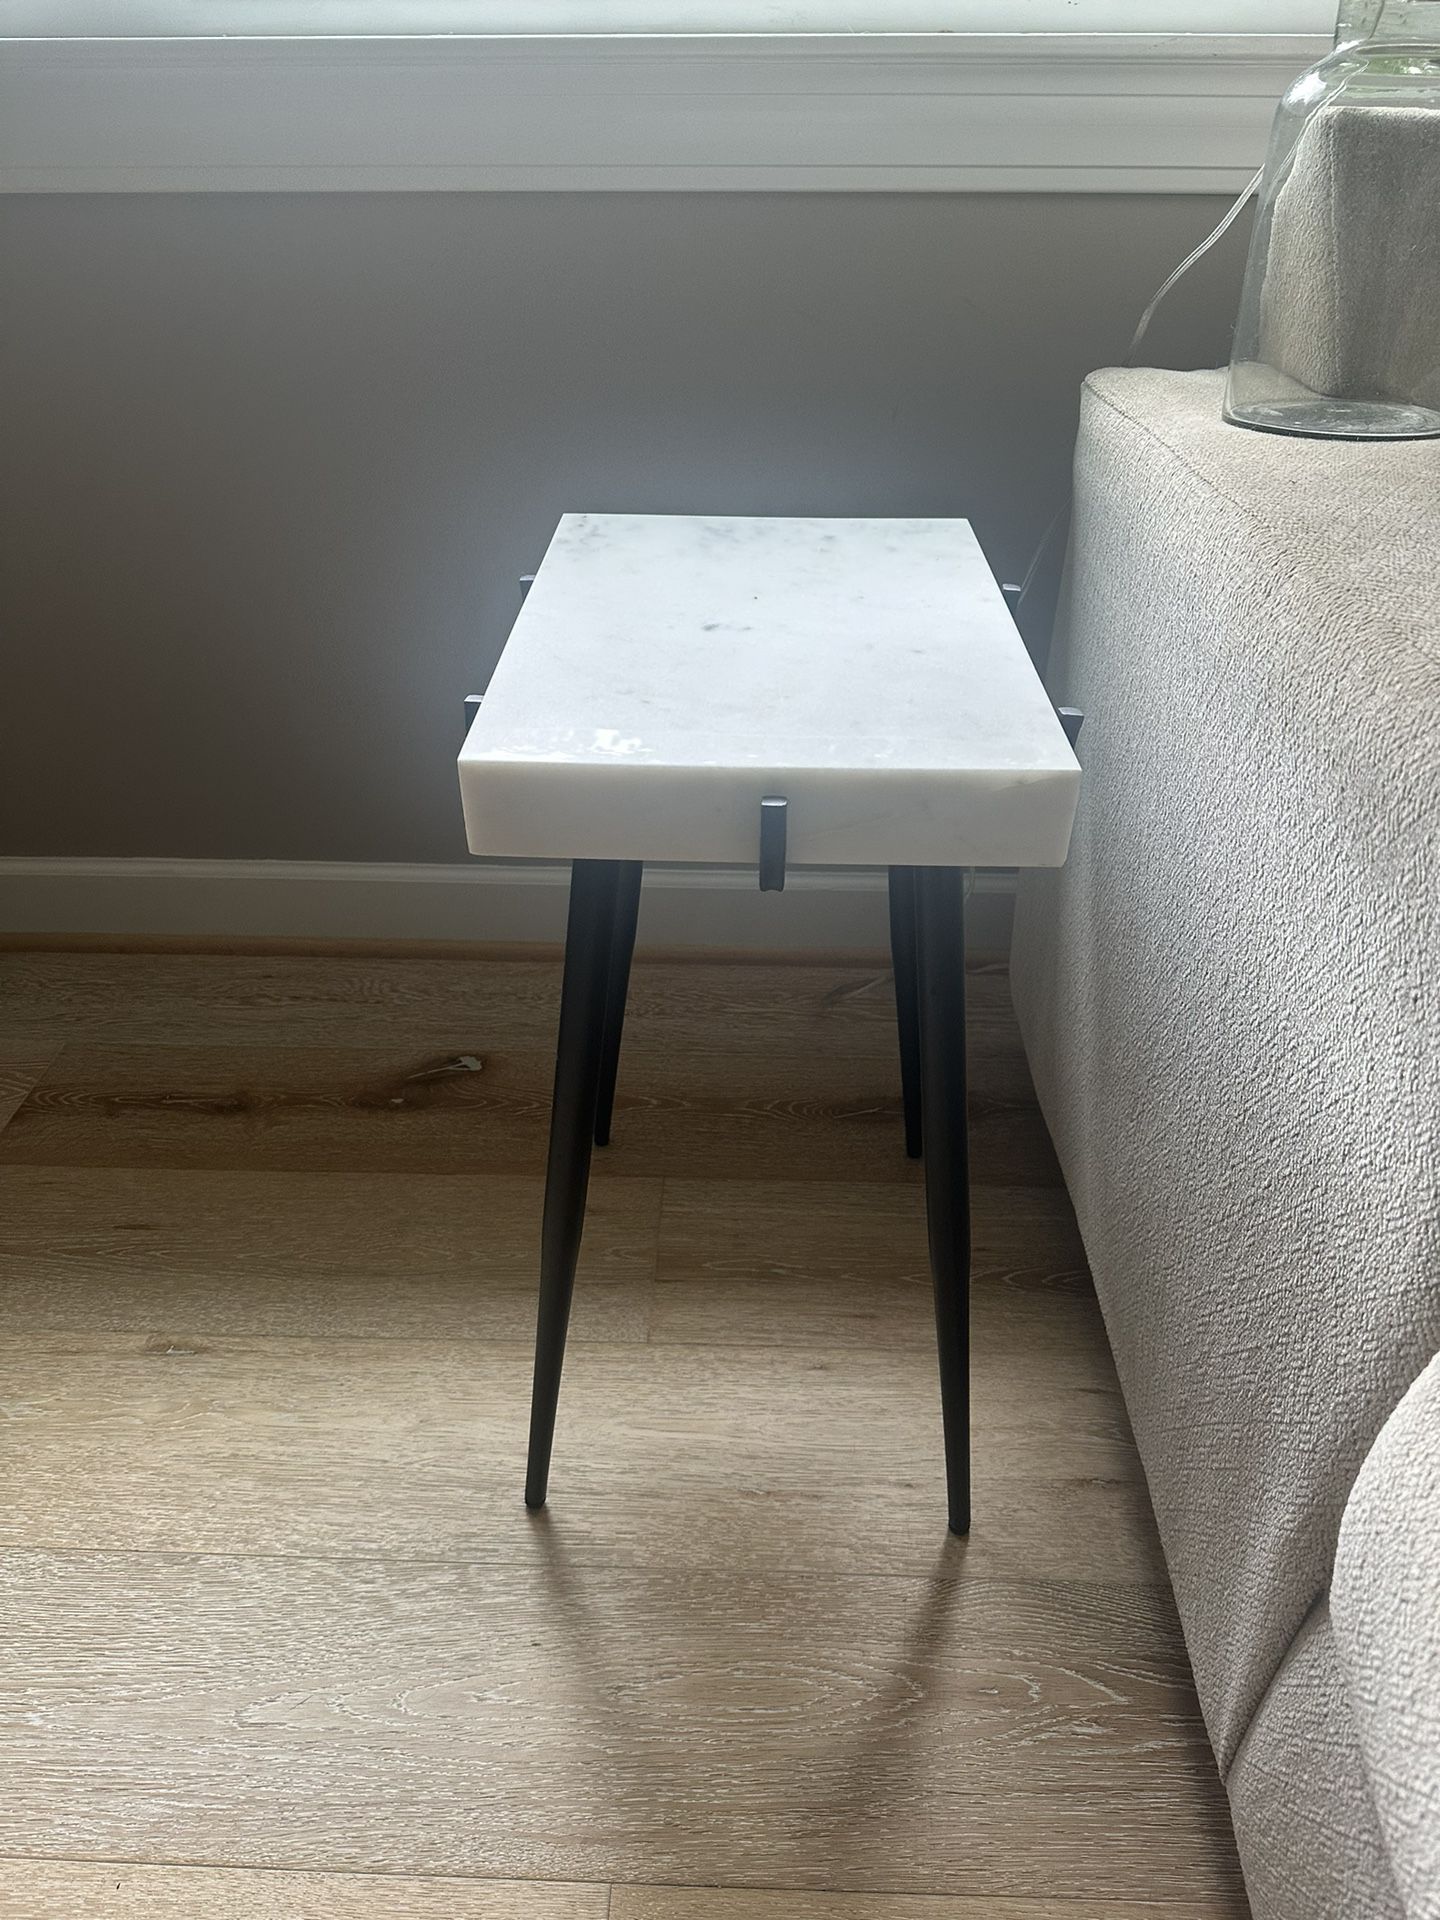 2 Marble End Tables